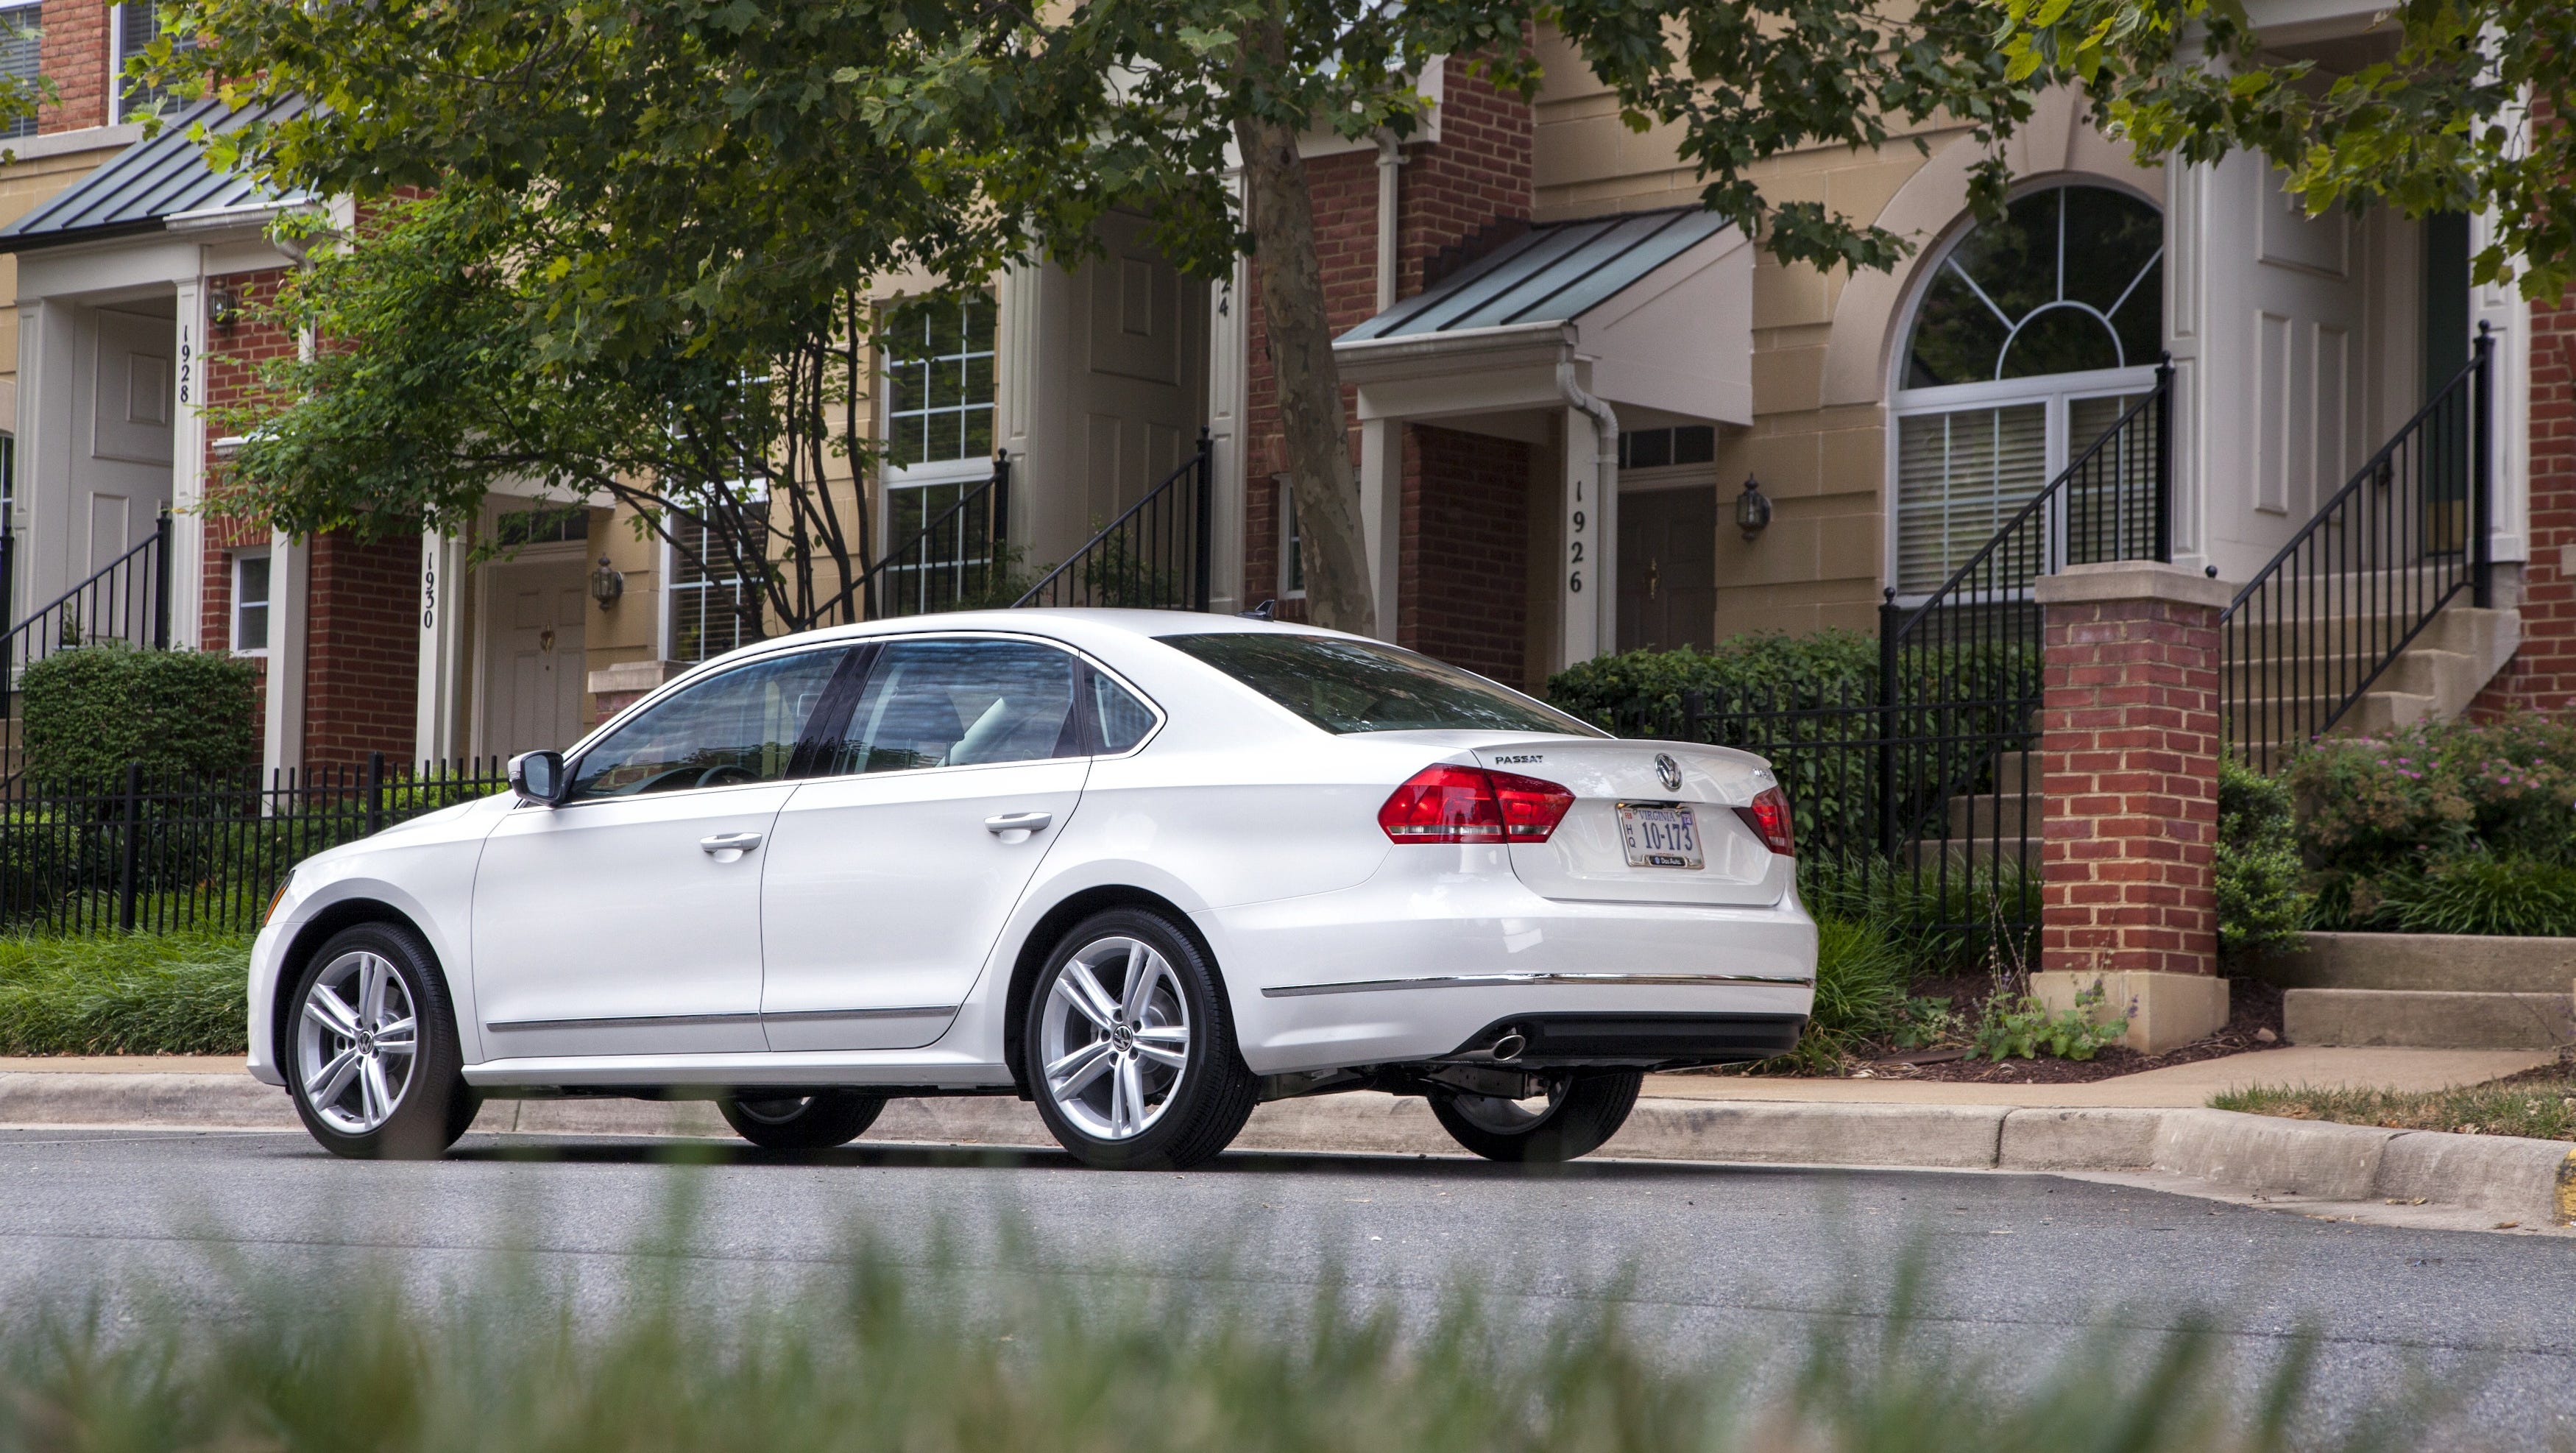 Auto review: 2014 Volkswagen Passat stretches out nicely